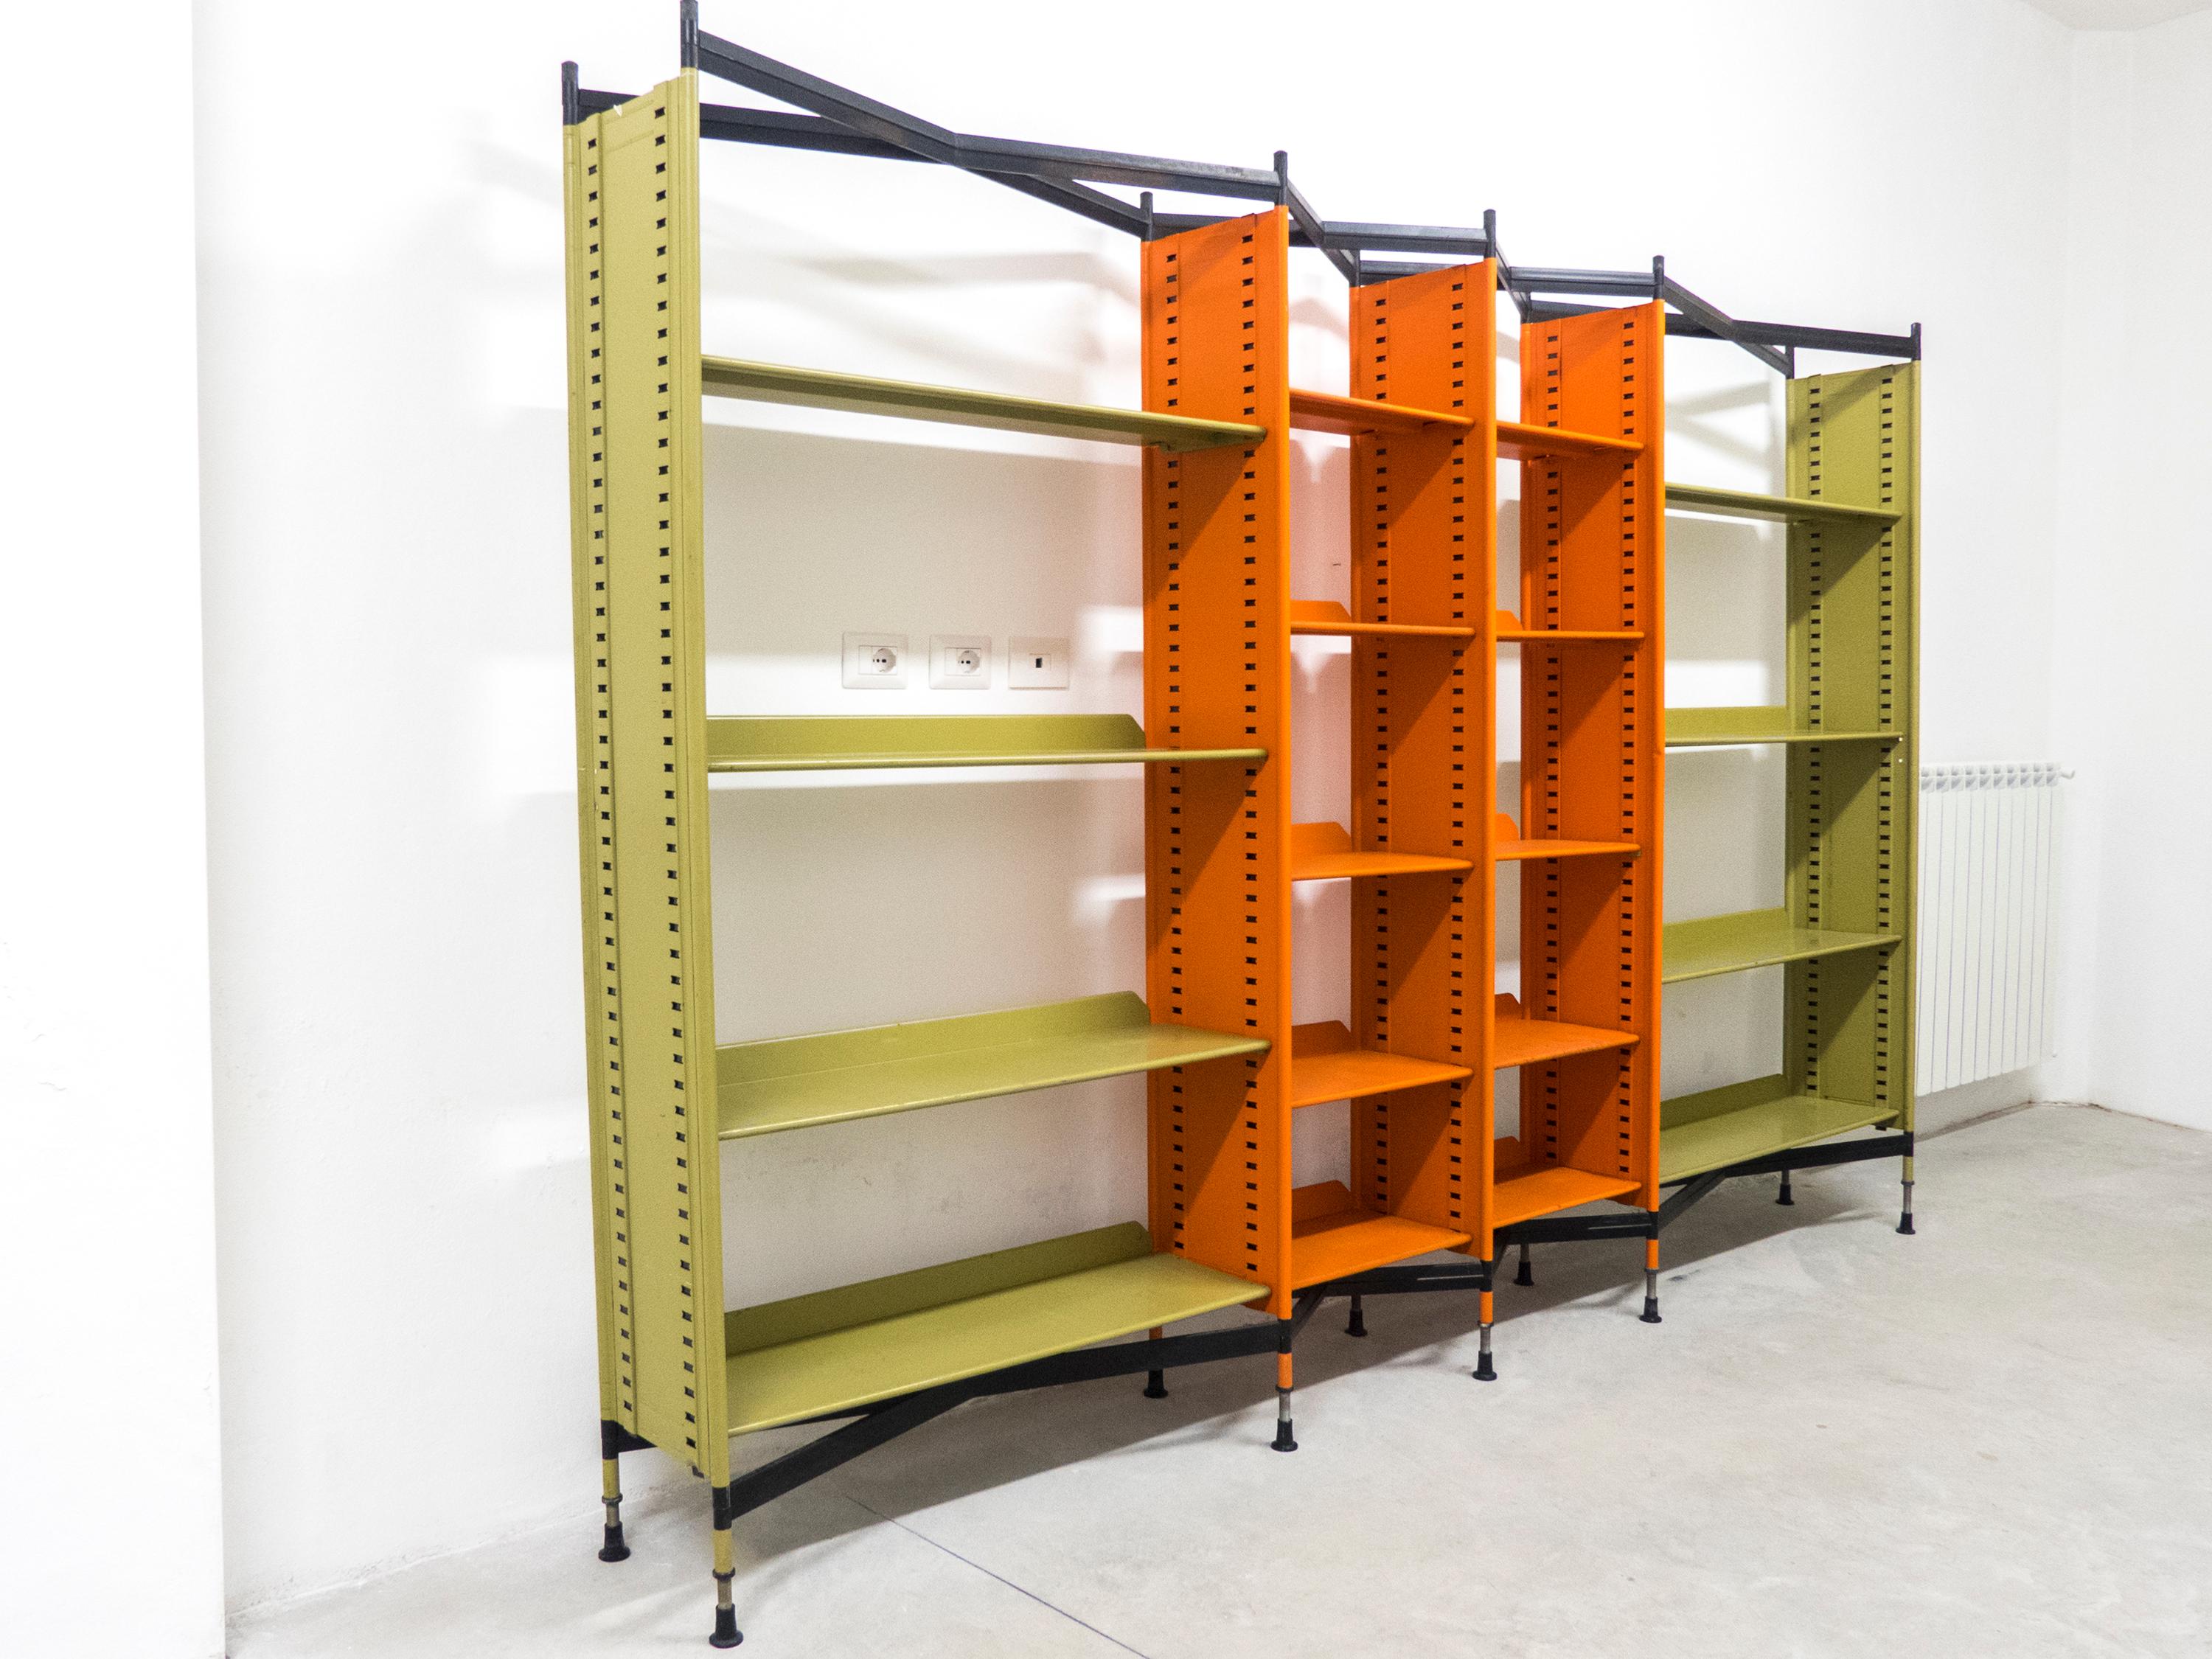 The Spazio office system was designed in 1960 by Lodovico Barbiano di Belgiojoso, Enrico Peressutti and Ernesto Nathan Rogers (Studio BBPR). In 1962 it won the Compasso d'Oro award. This bookshelf is fully combinable, shelves can be changed of place